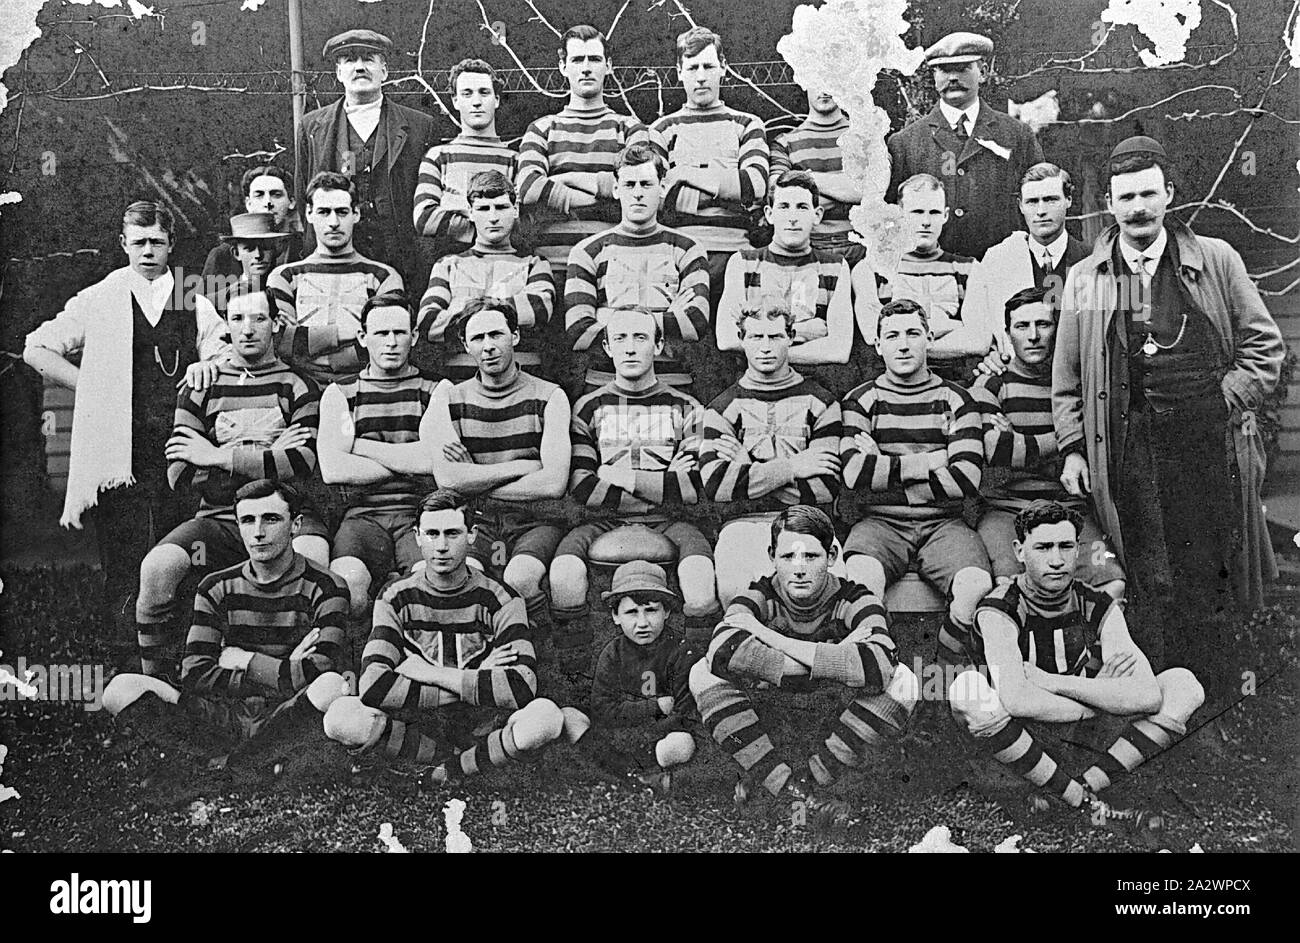 Negative - Learmonth, Victoria, circa 1910, Members of the Learmonth Football Club Stock Photo